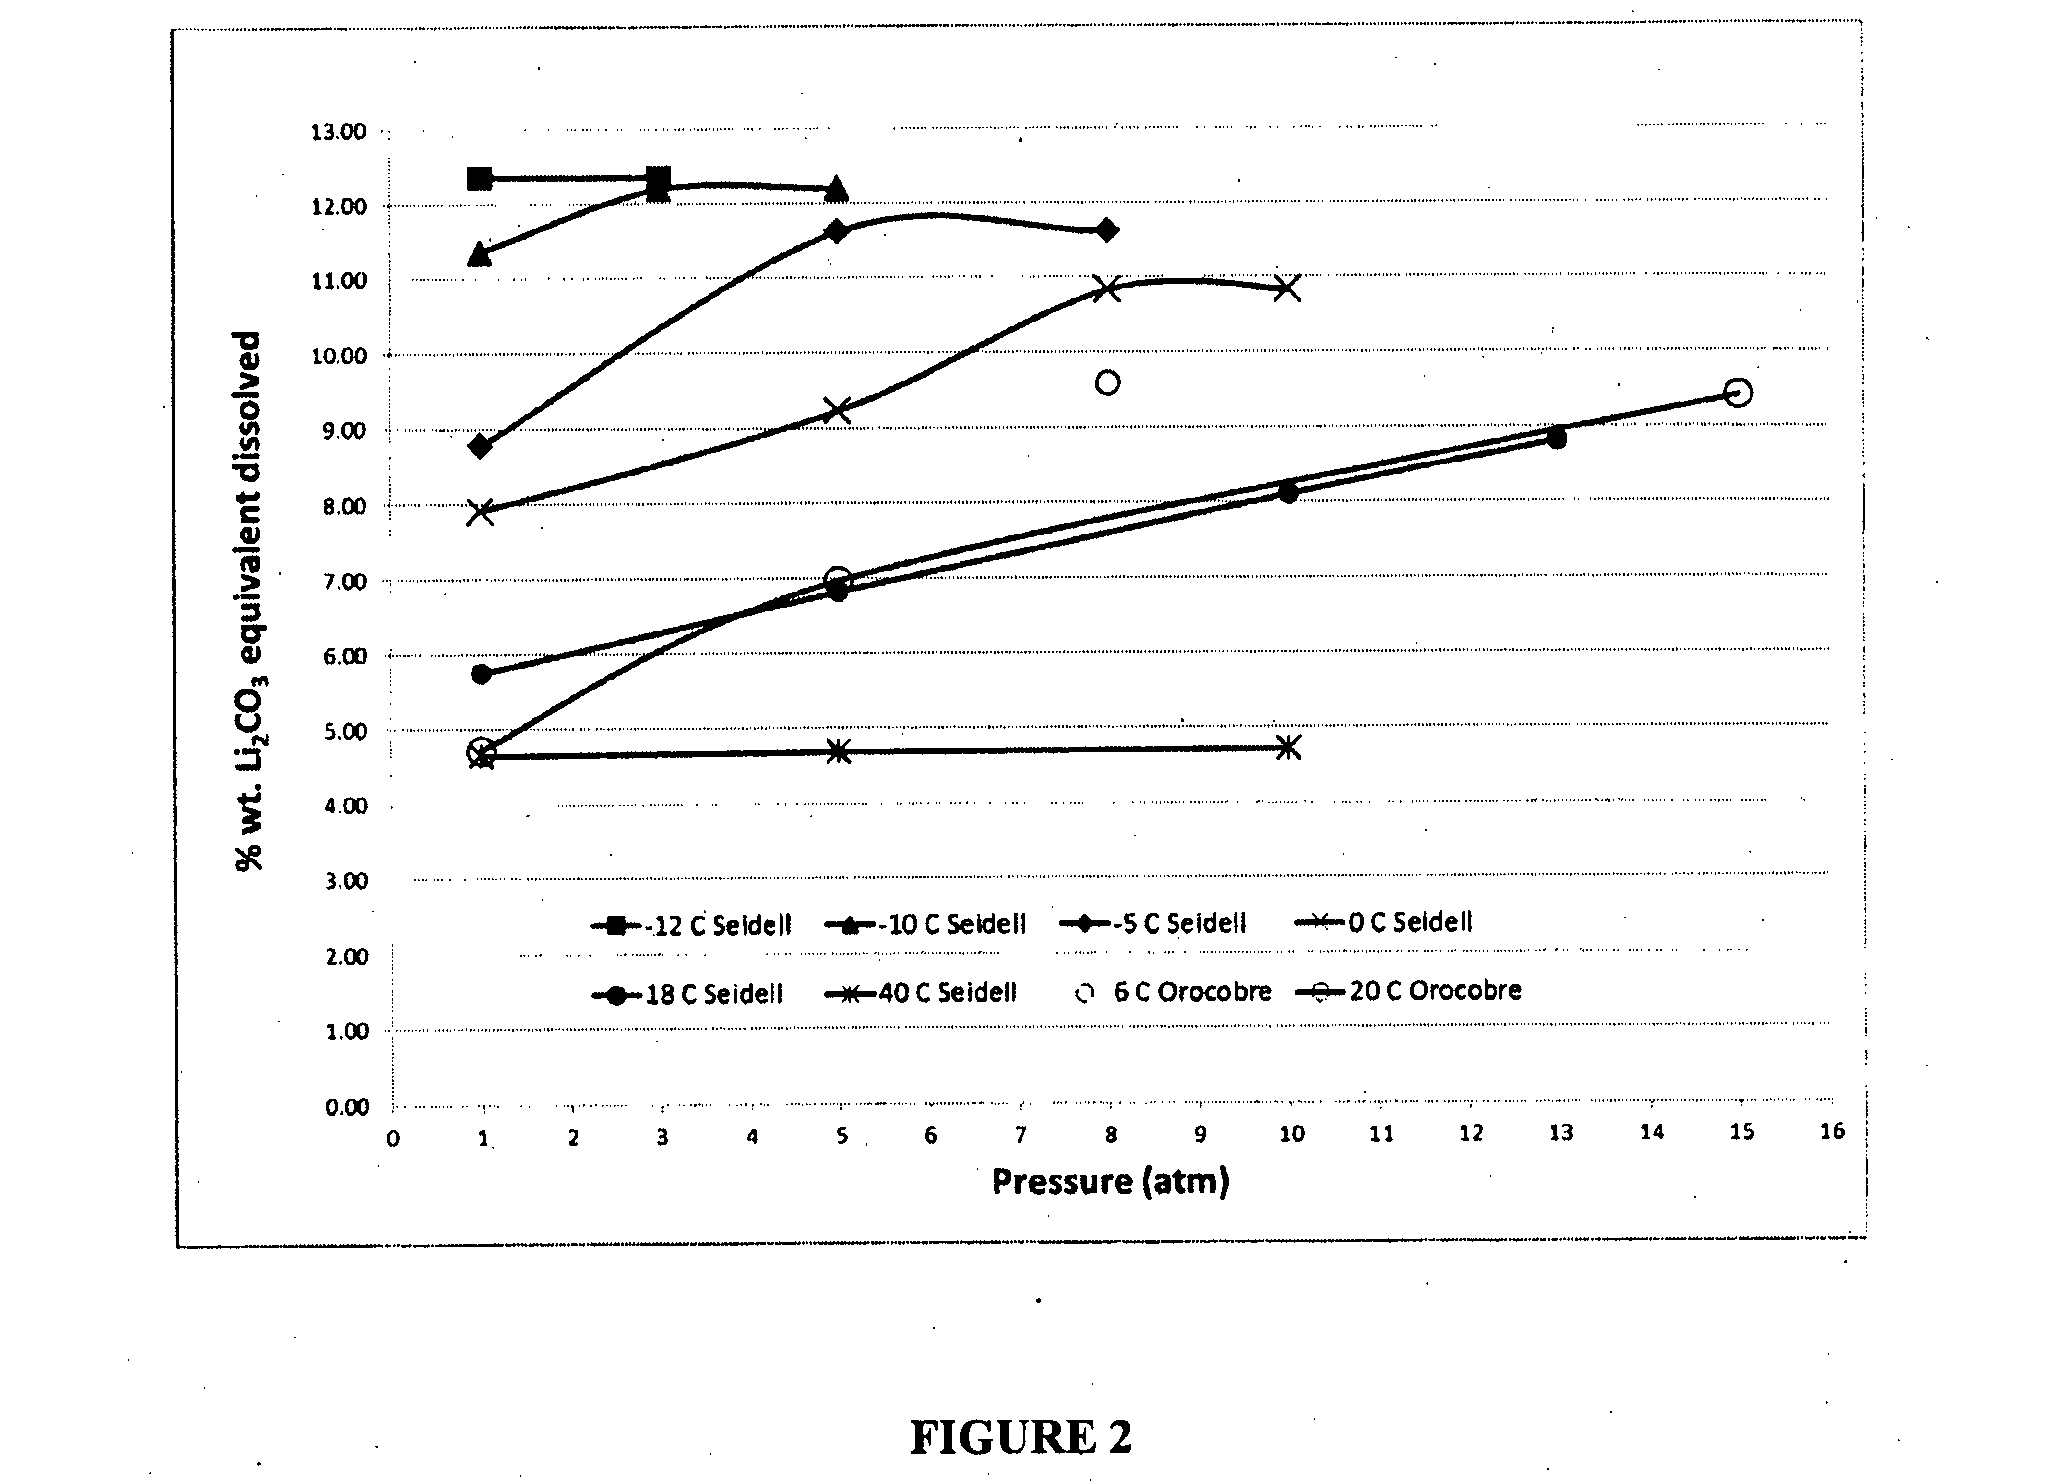 Process for producing lithium carbonate from concentrated lithium brine